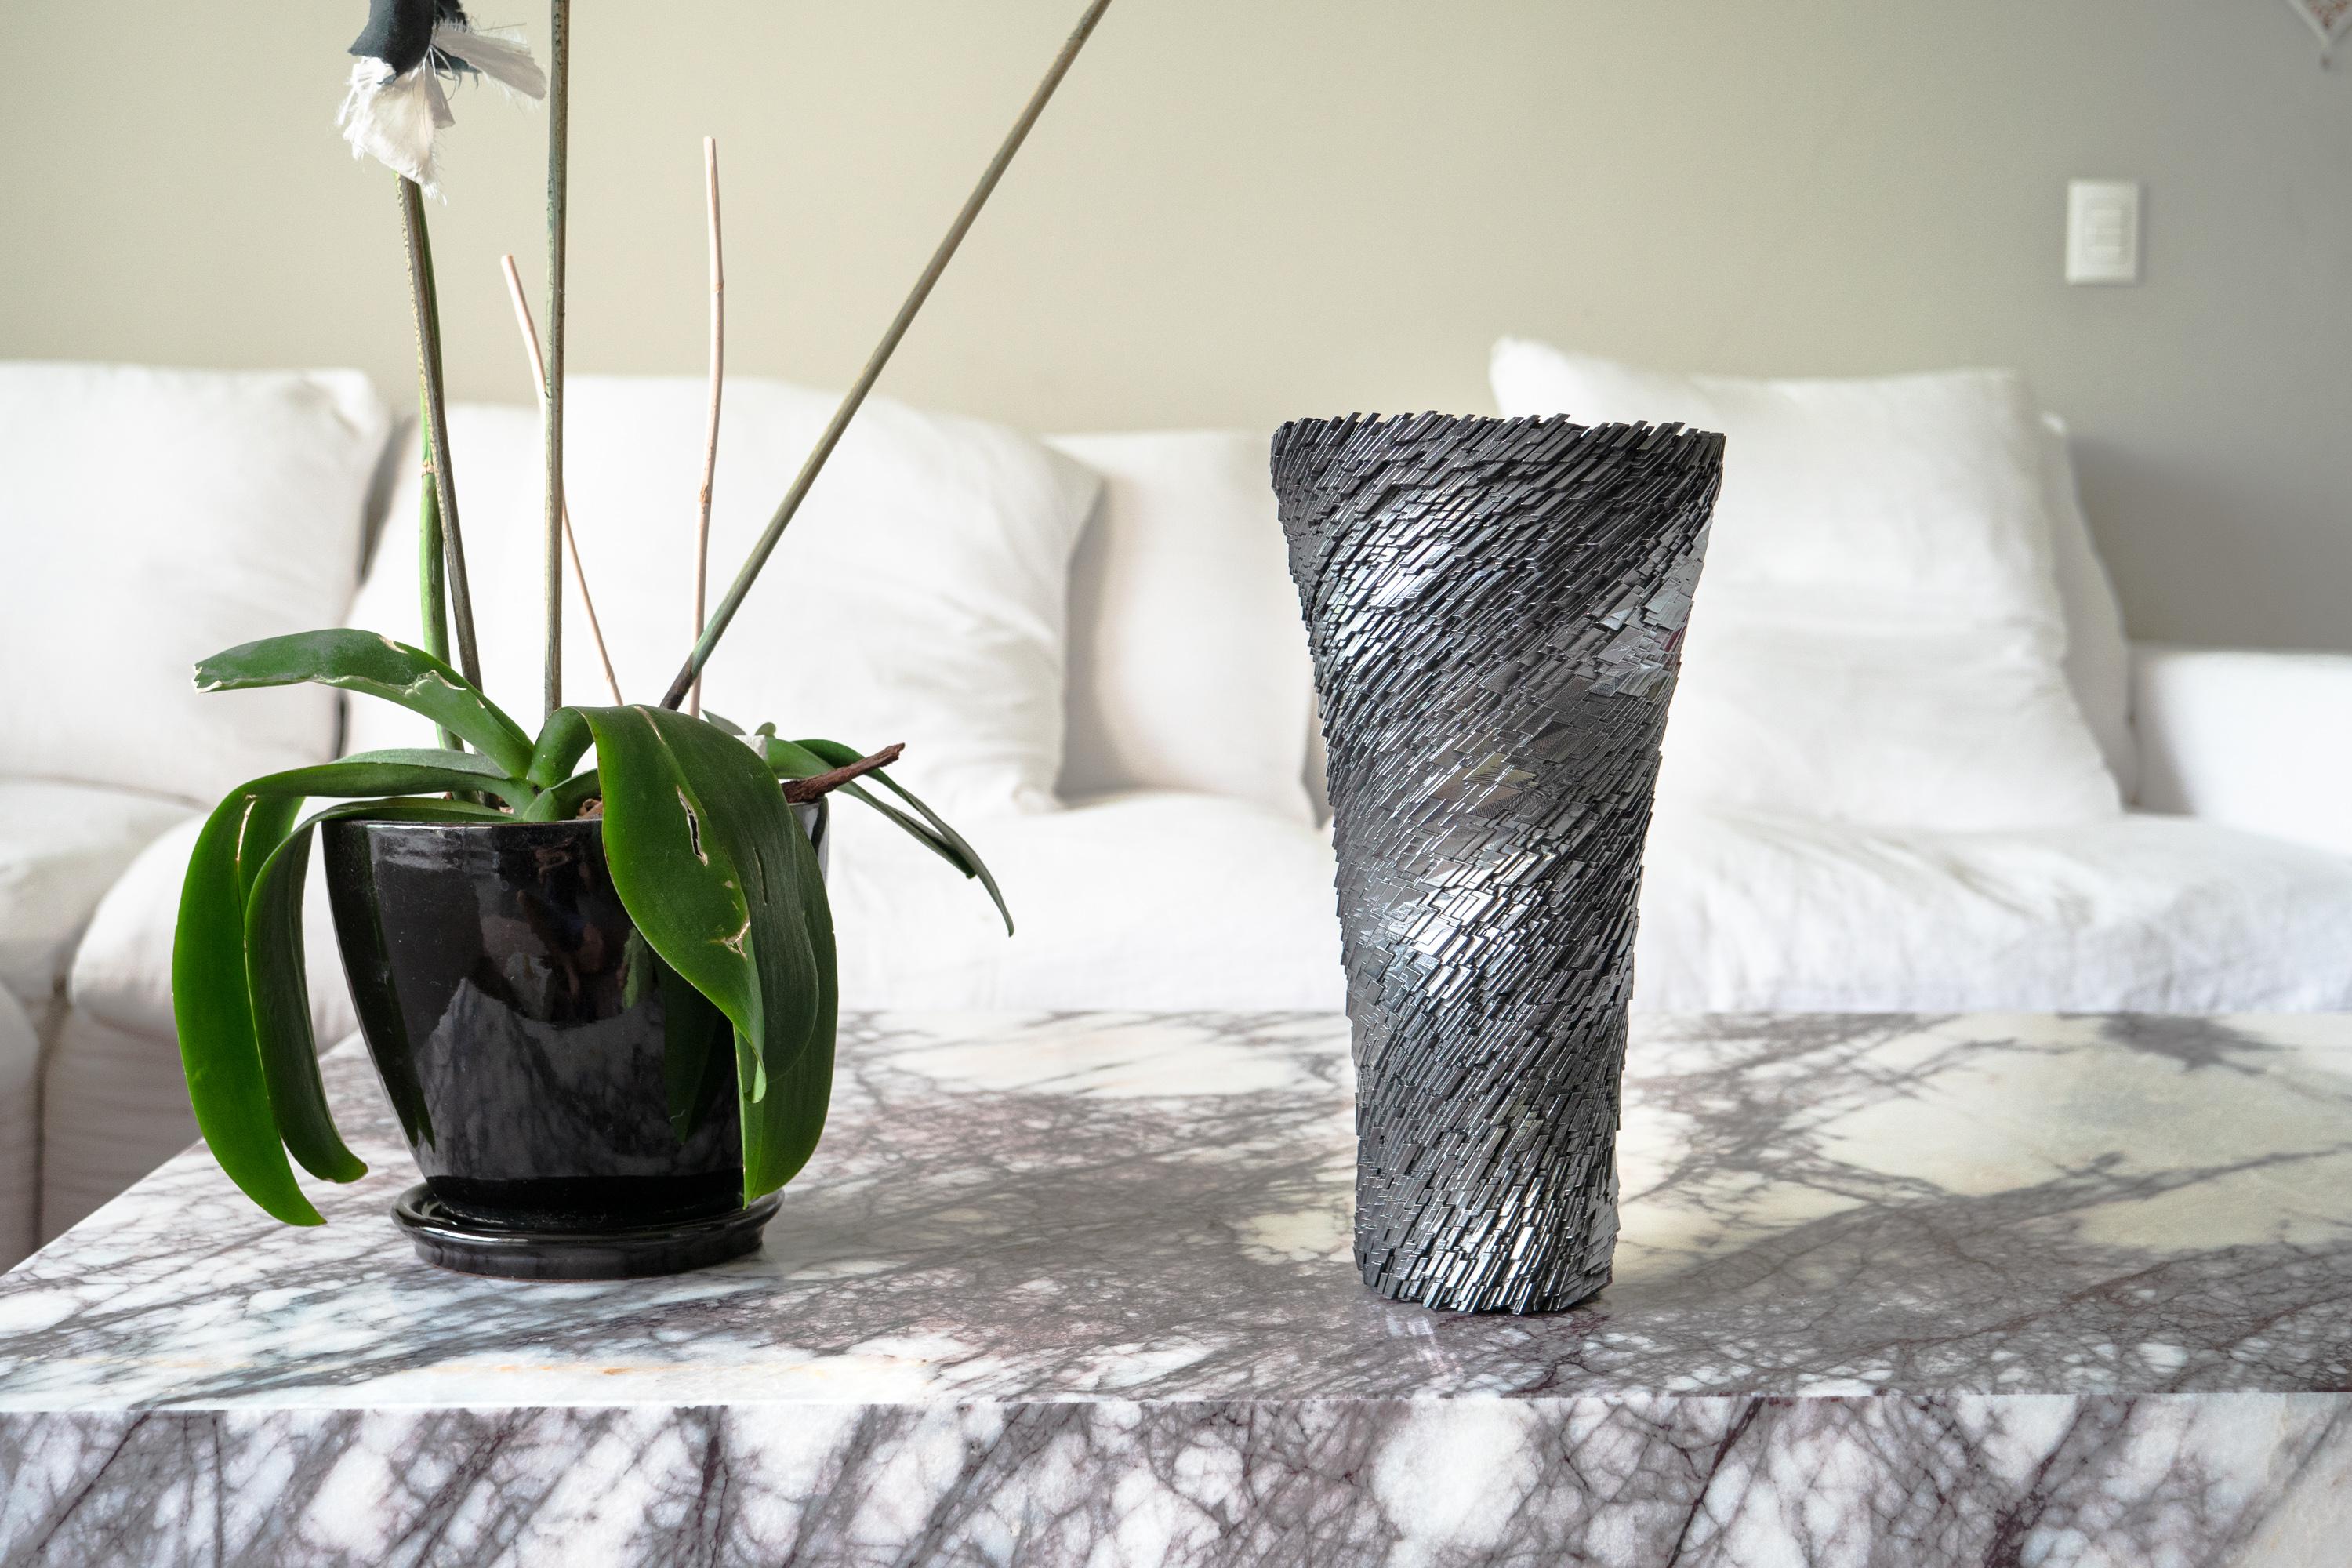 A unique geometric vase showcasing the procedural design Katz Studio is known for.

Additive manufacturing resin finished with graphite for a unique dark chrome reflective finish.

For decorative purposes only, finish will degrade with prolonged